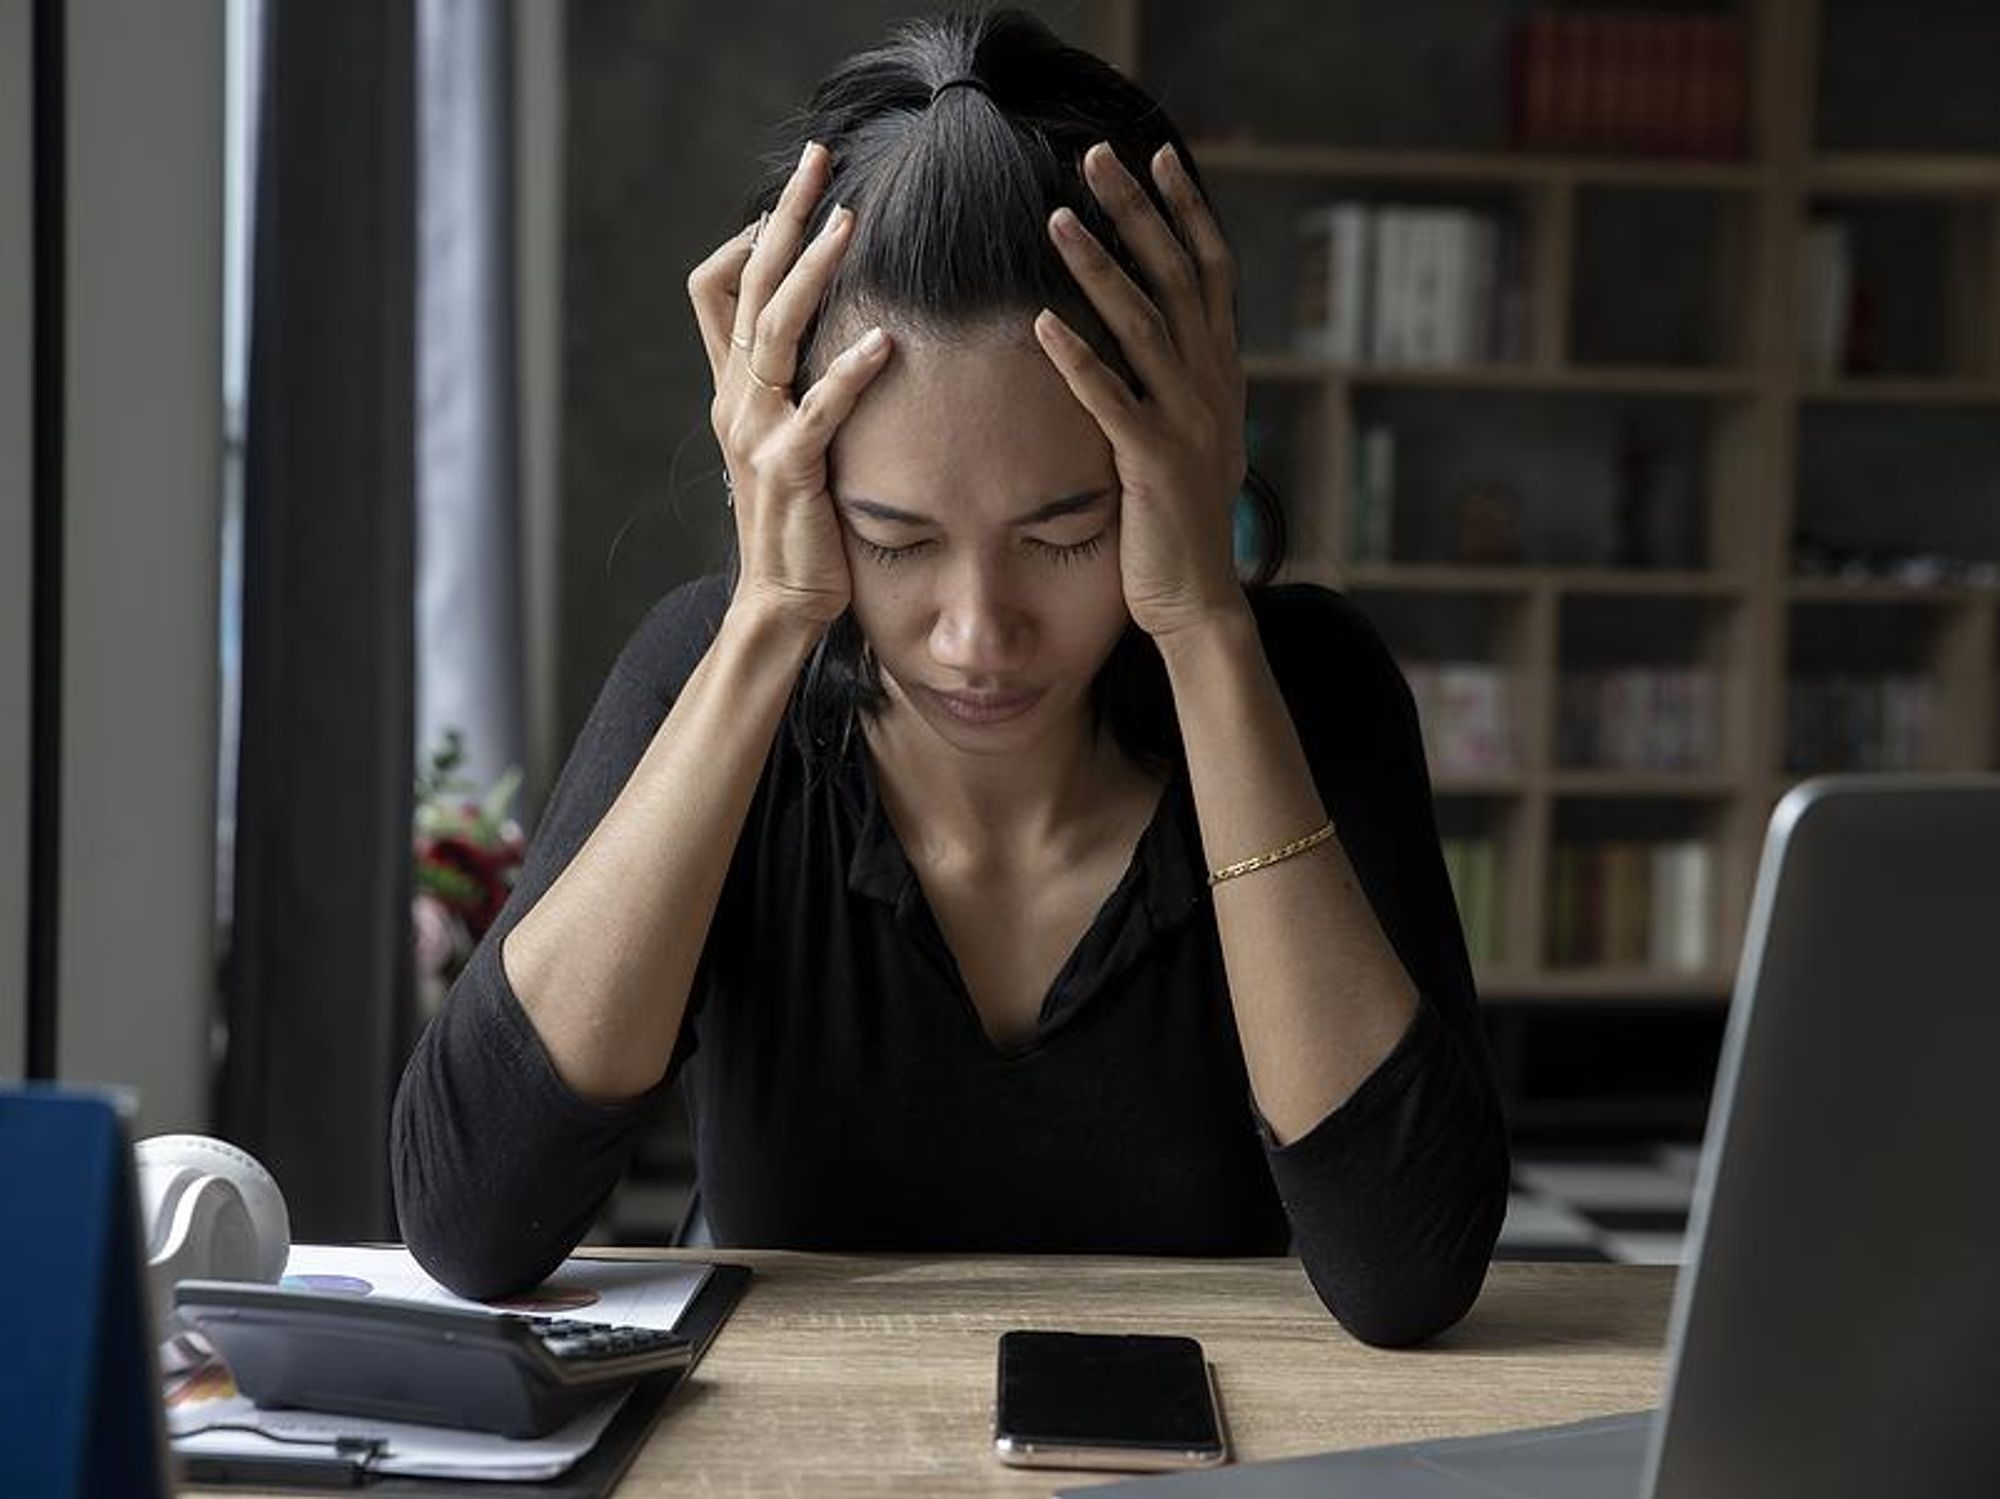 Frustrated job seeker stresses out after a few mistakes derail her search.